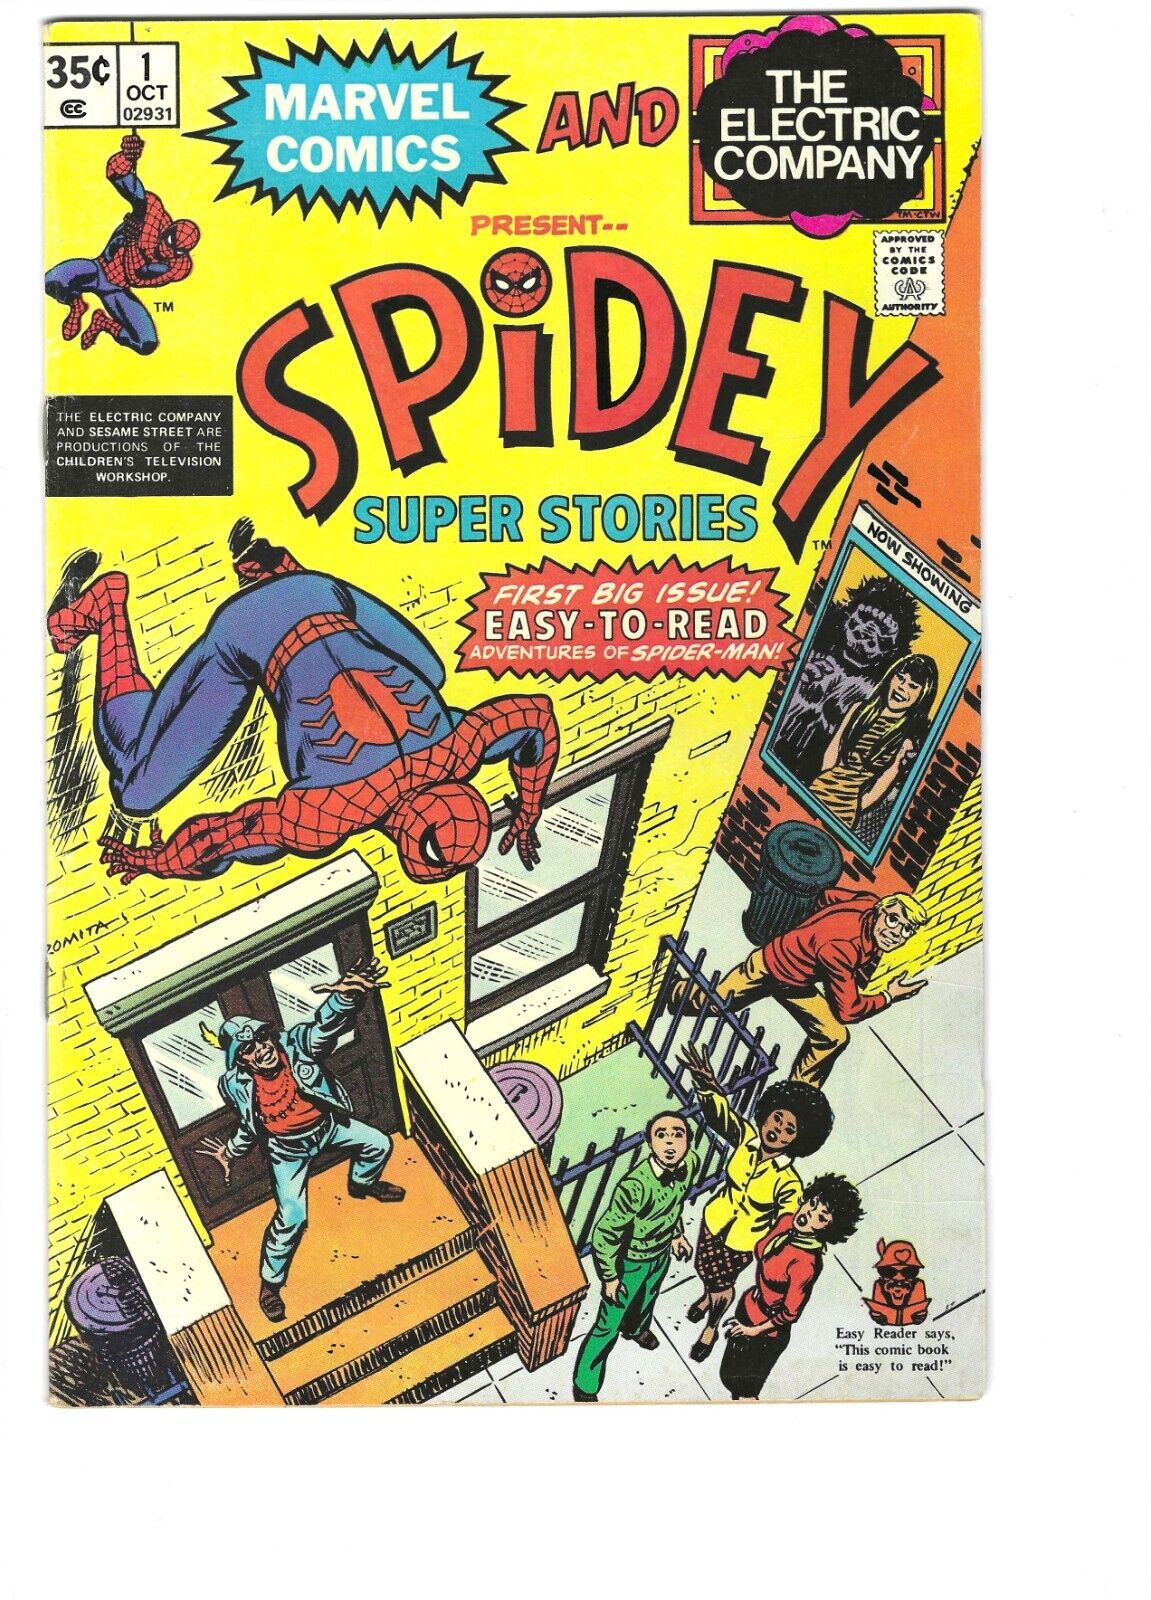 Spidey Super Stories and the Electric Company #1 October 1974 FN